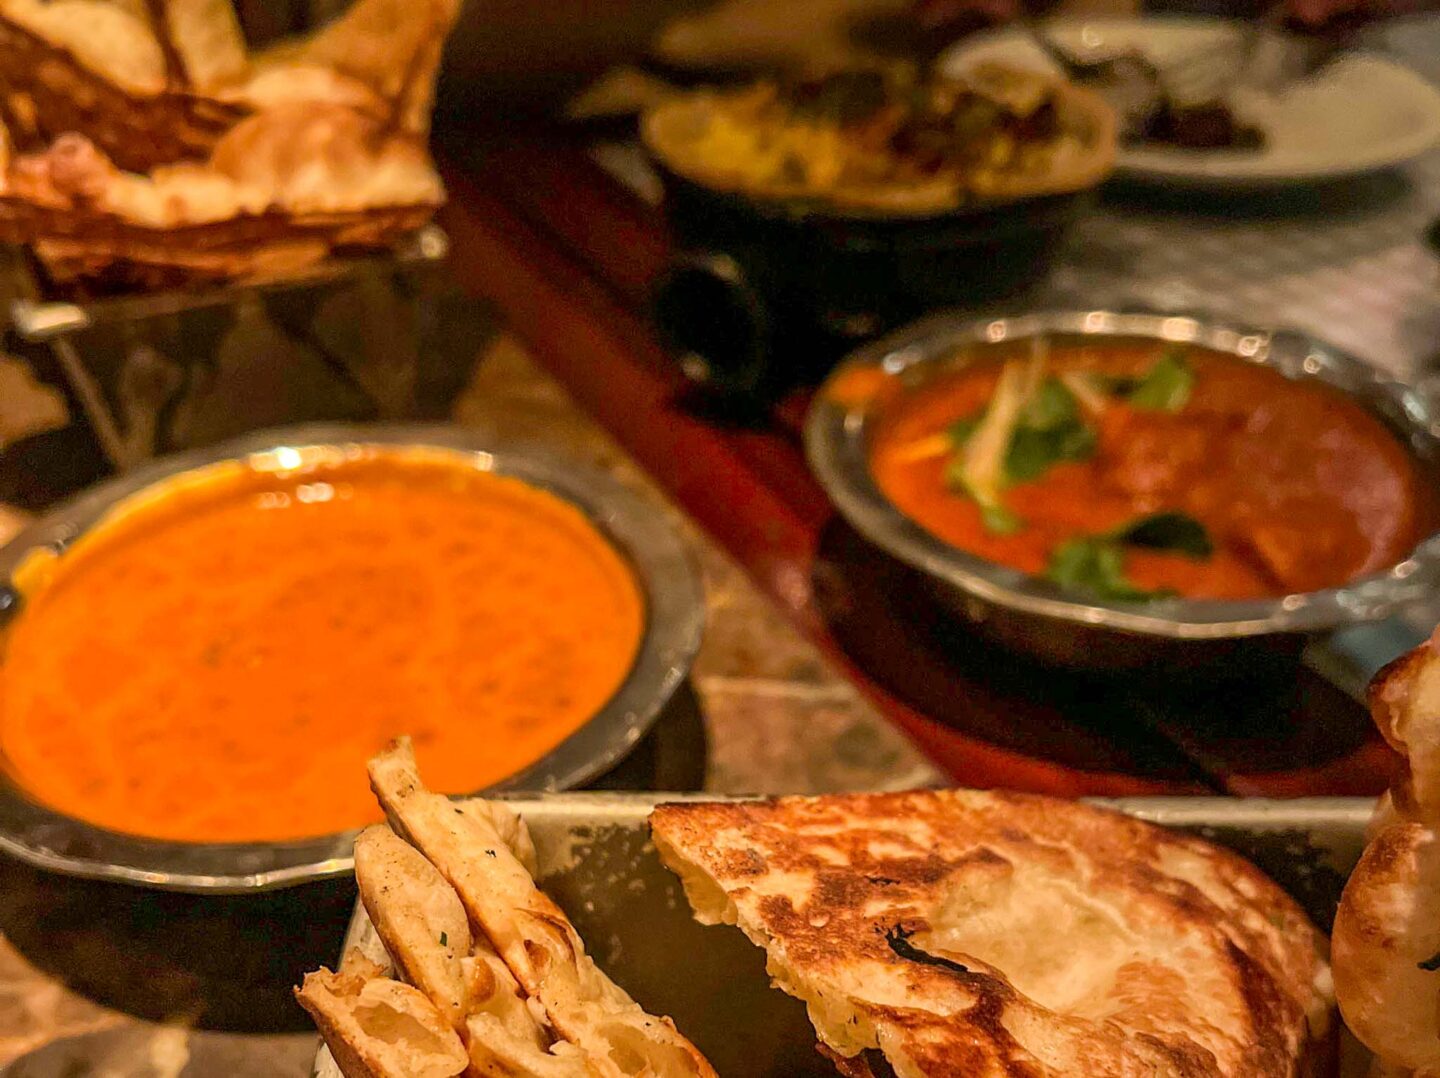 halal restaurants in manchester,  curry at Dishoom, Dishoom Halal Manchester